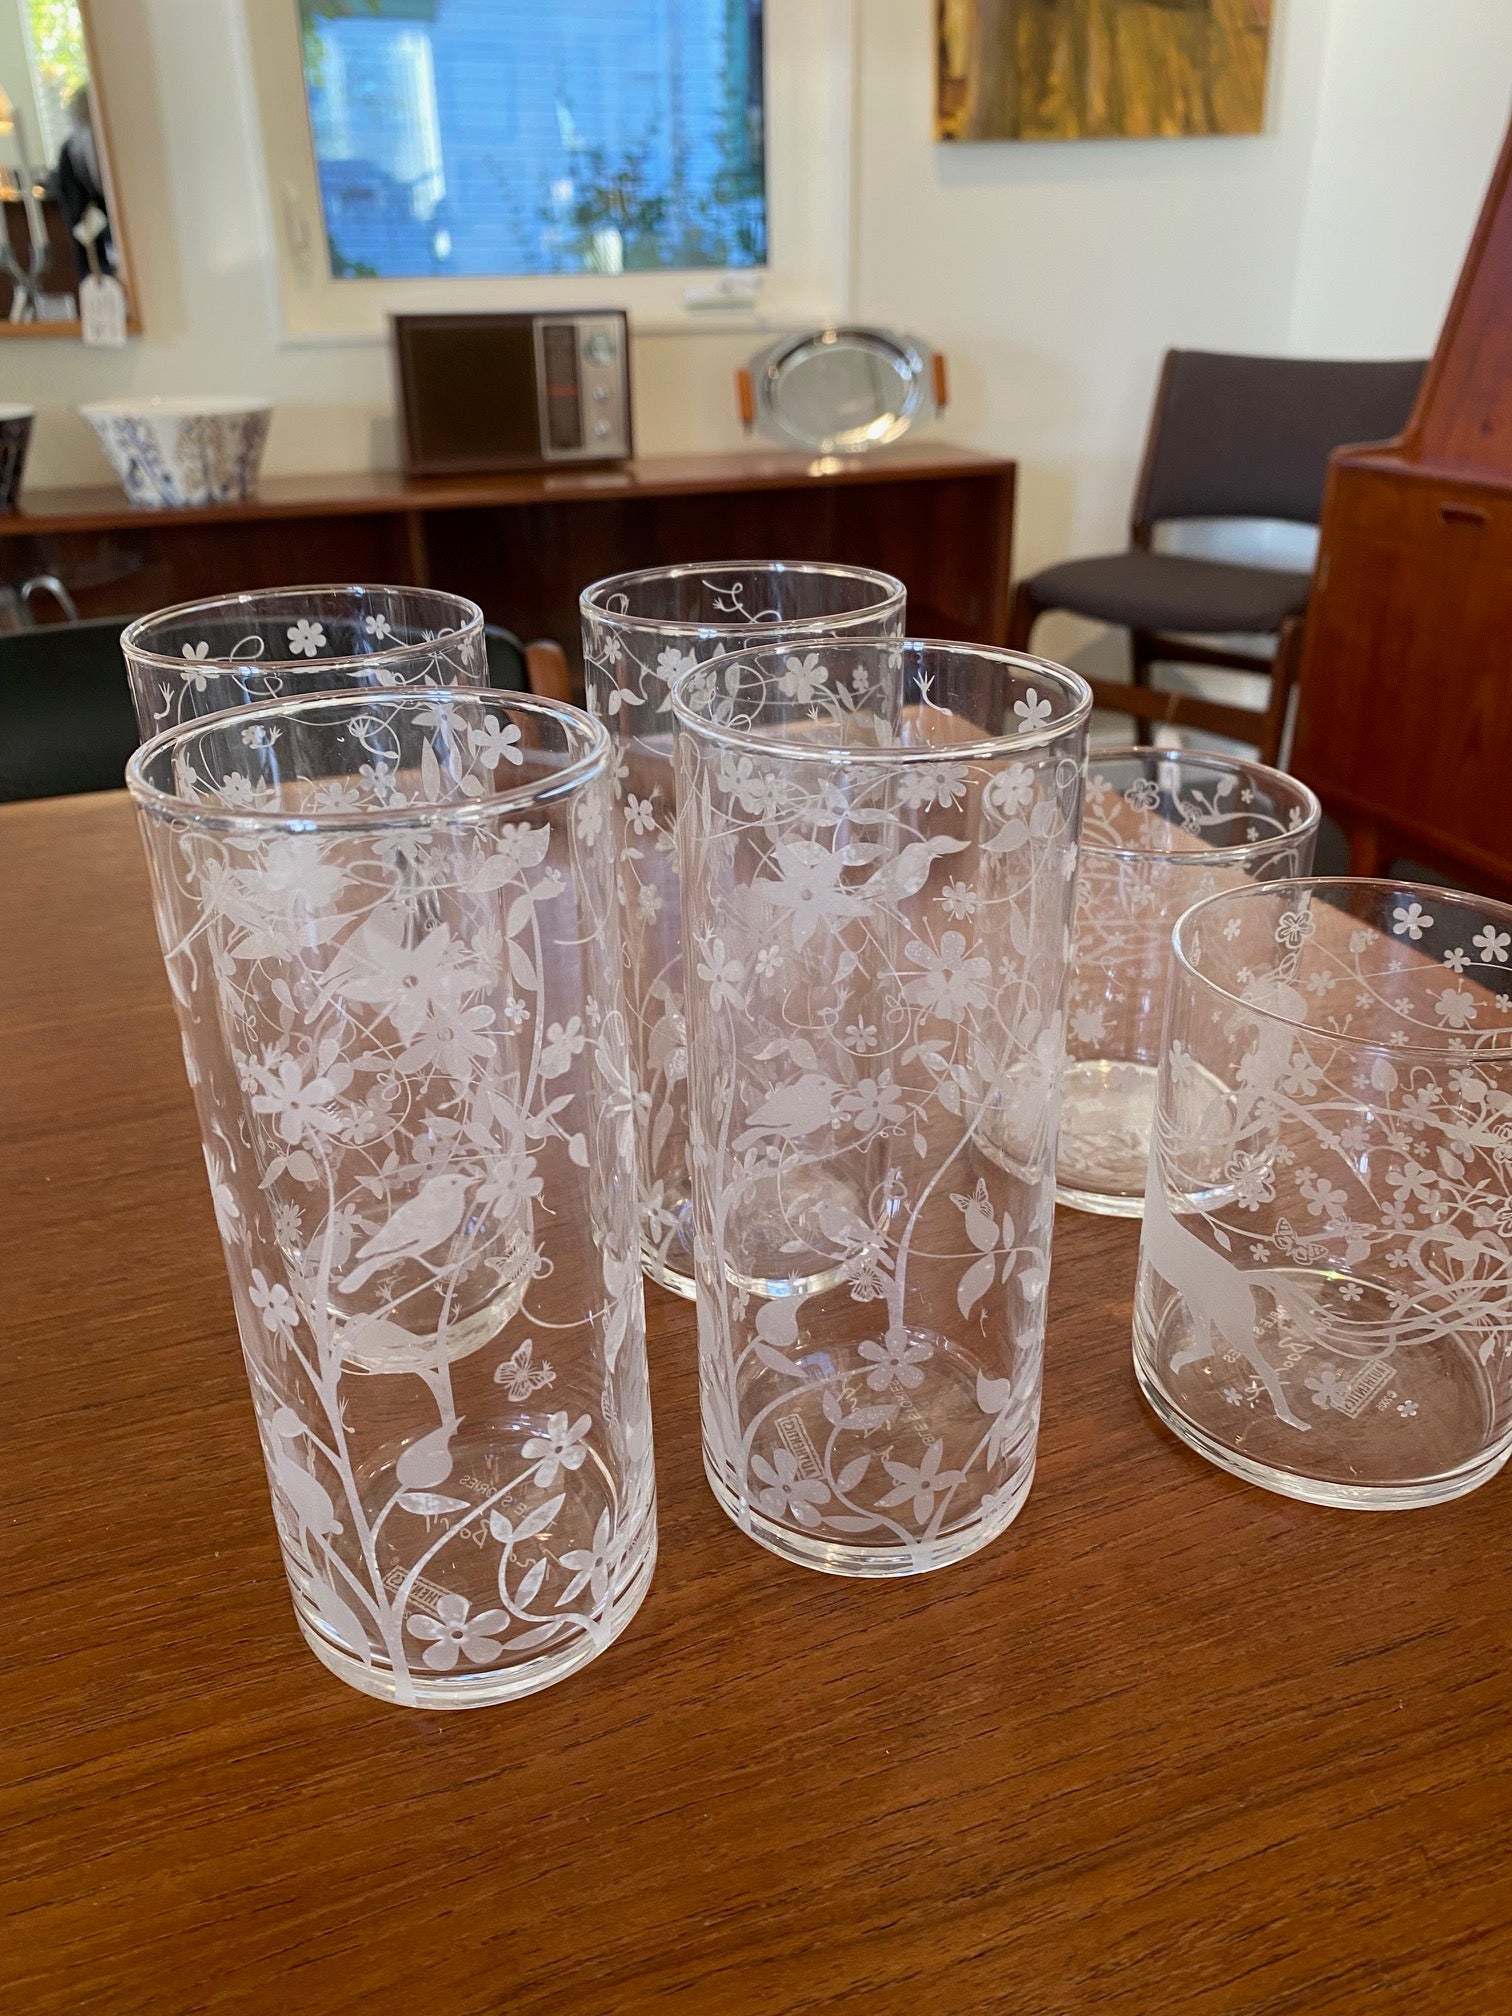 Tord Boontje "Table Stories" highball glass tumbler. Beautiful intricate etched detail of birds and flora. Shown with the Tord Boontje lowball-Cook Street Vintage